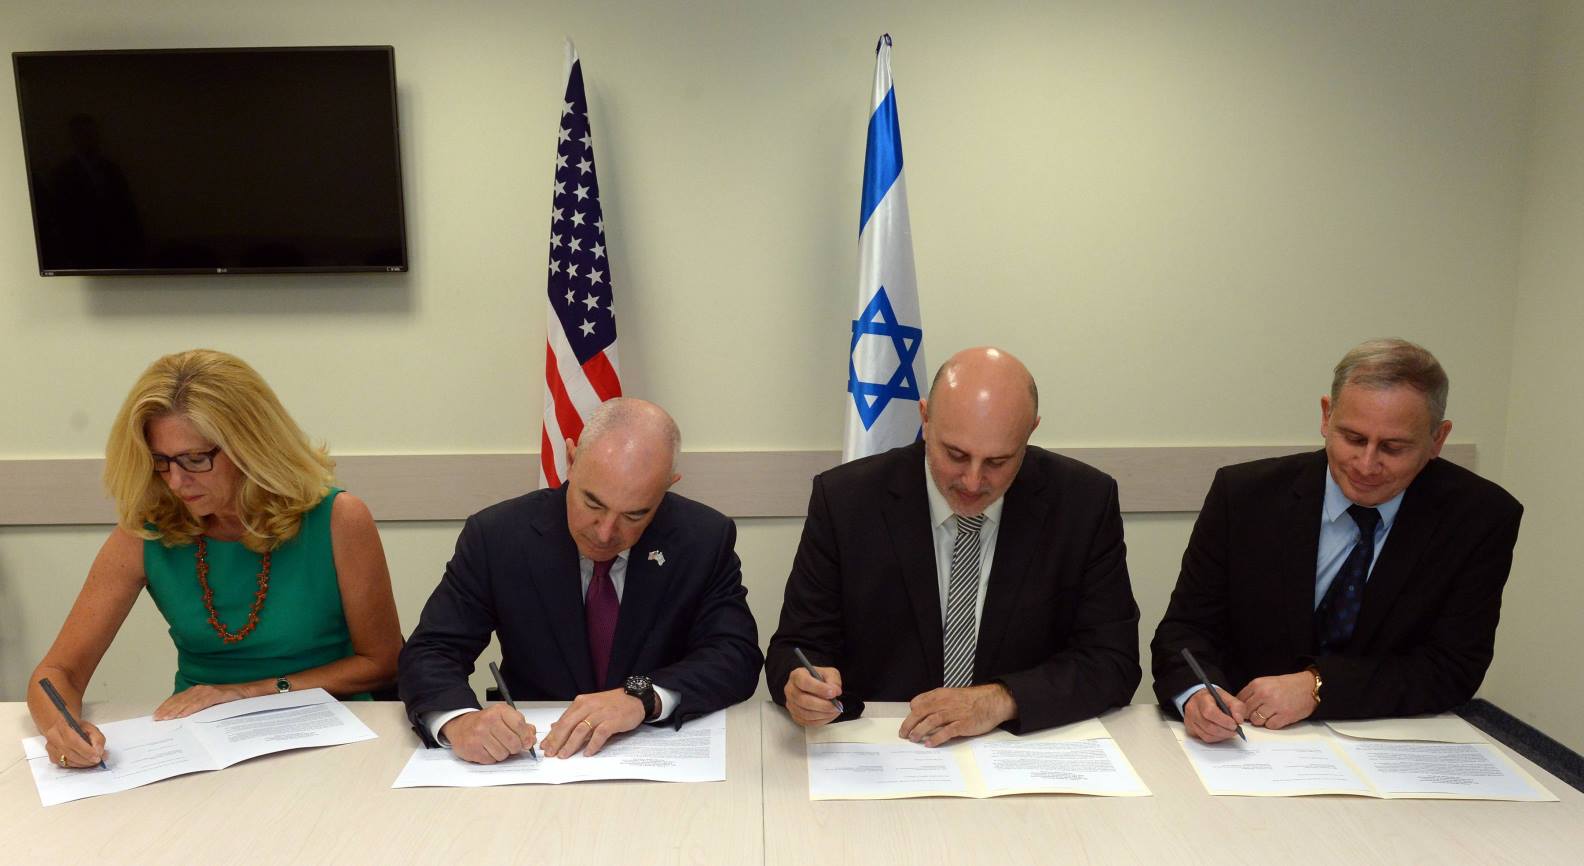 Israel, US sign cyber defense cooperation agreement in TLV ISRAEL21c